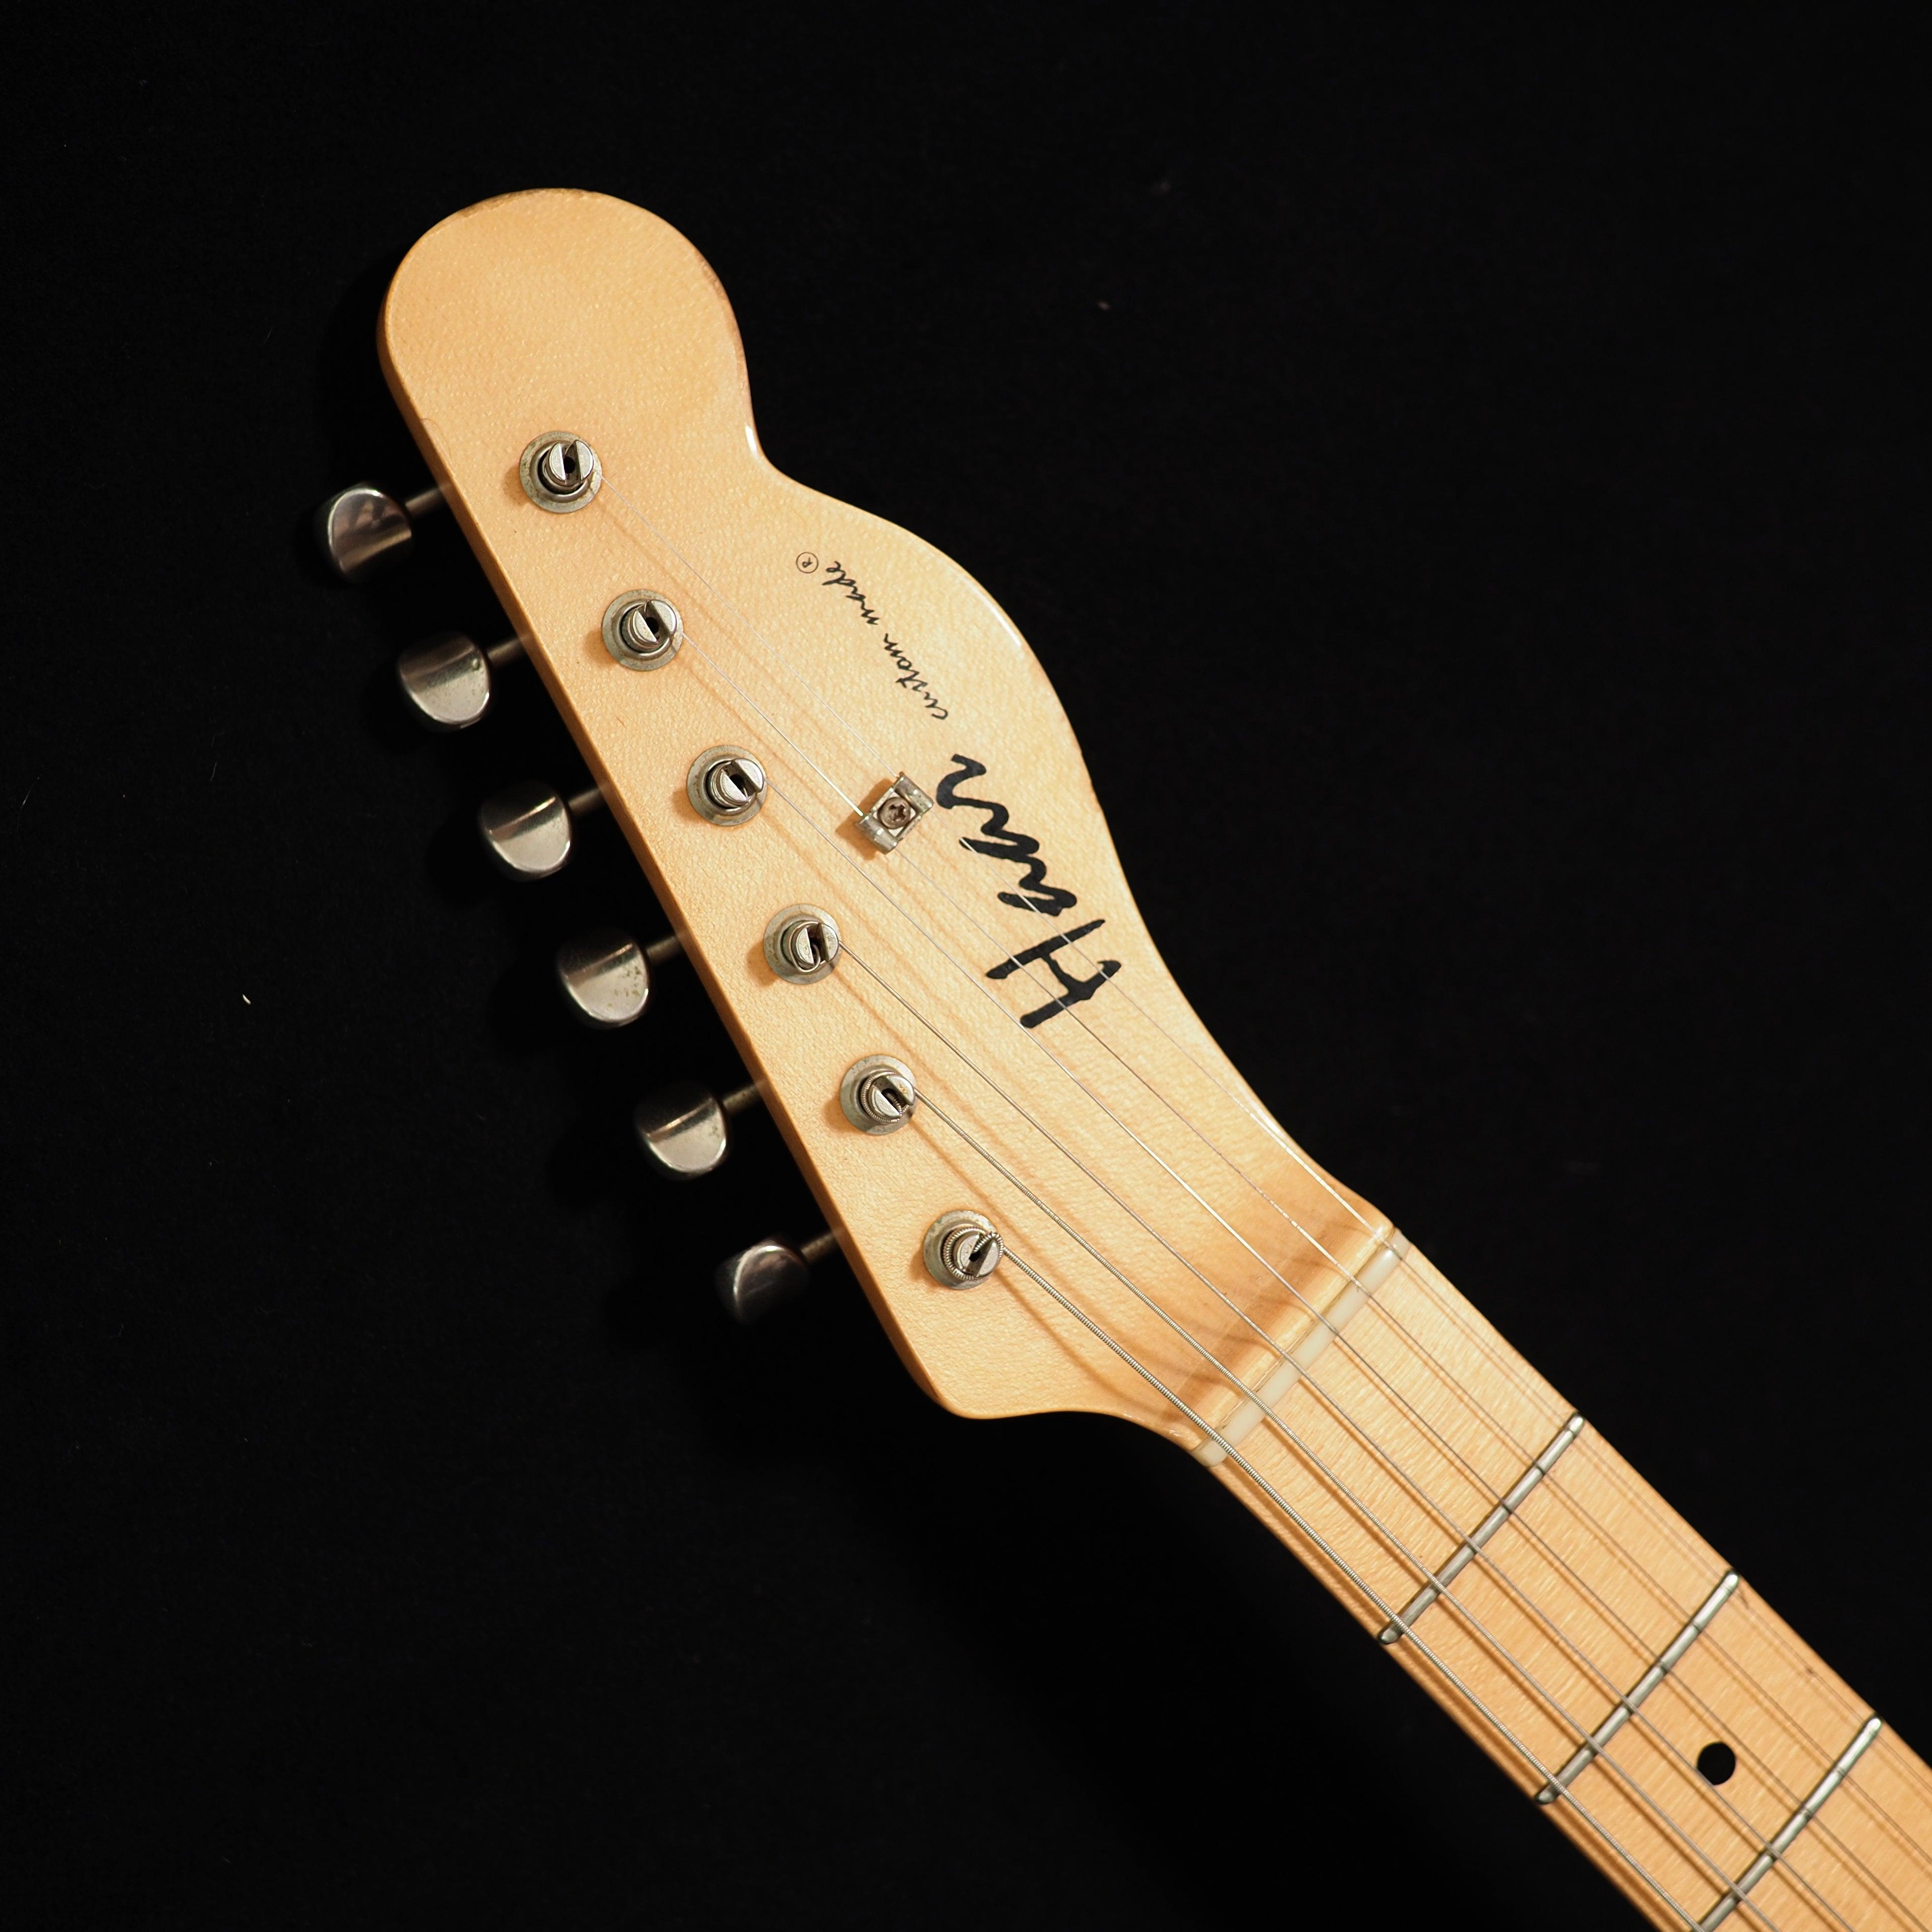 Haar Traditional T-Style with Fralin Pickups - wurst.guitars